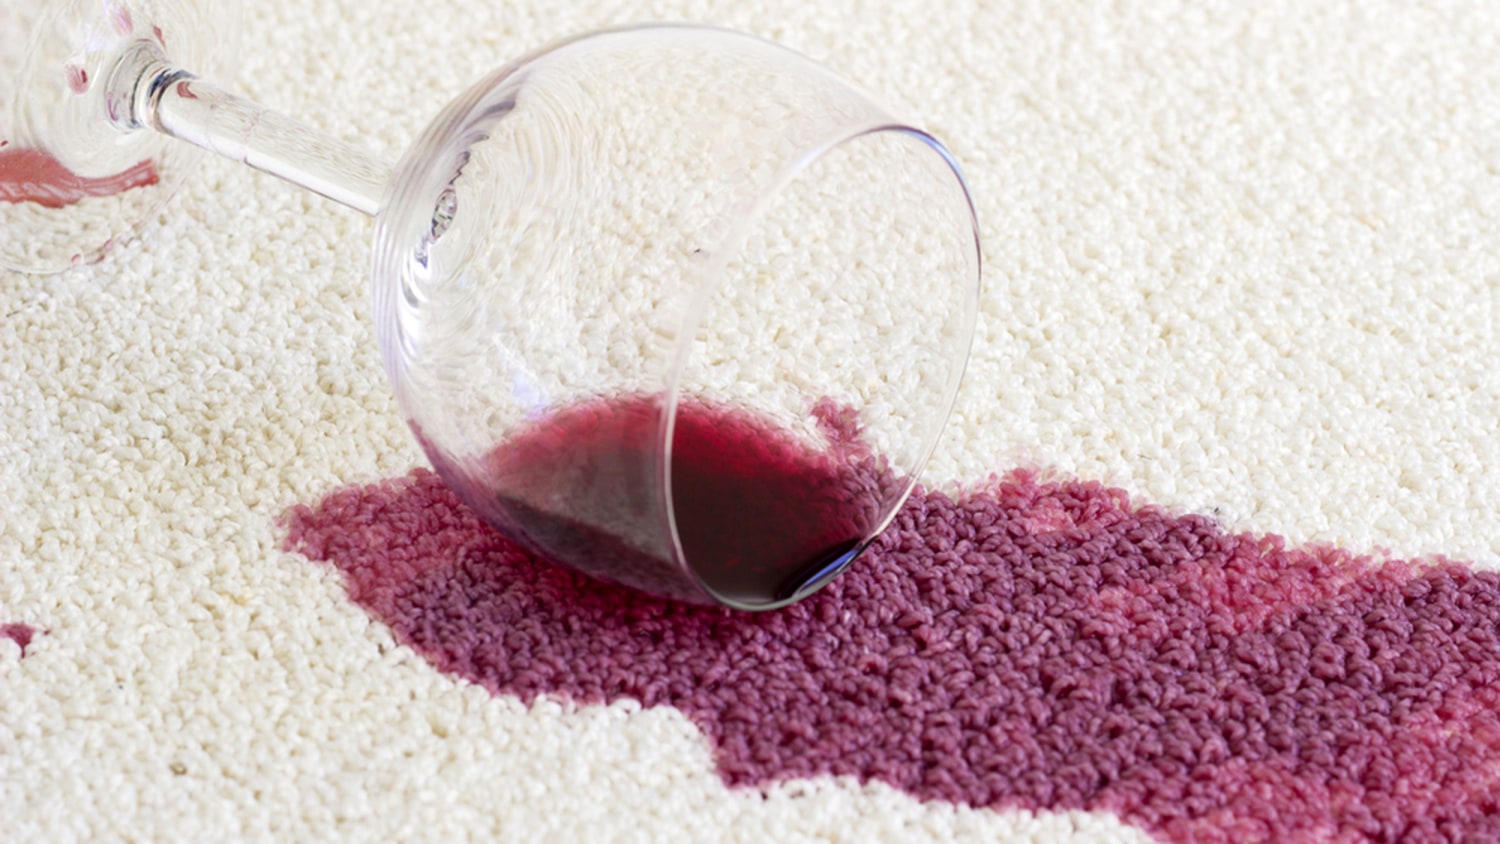 how do i remove red wine stains from tablecloths clothing and carpet without using bleach